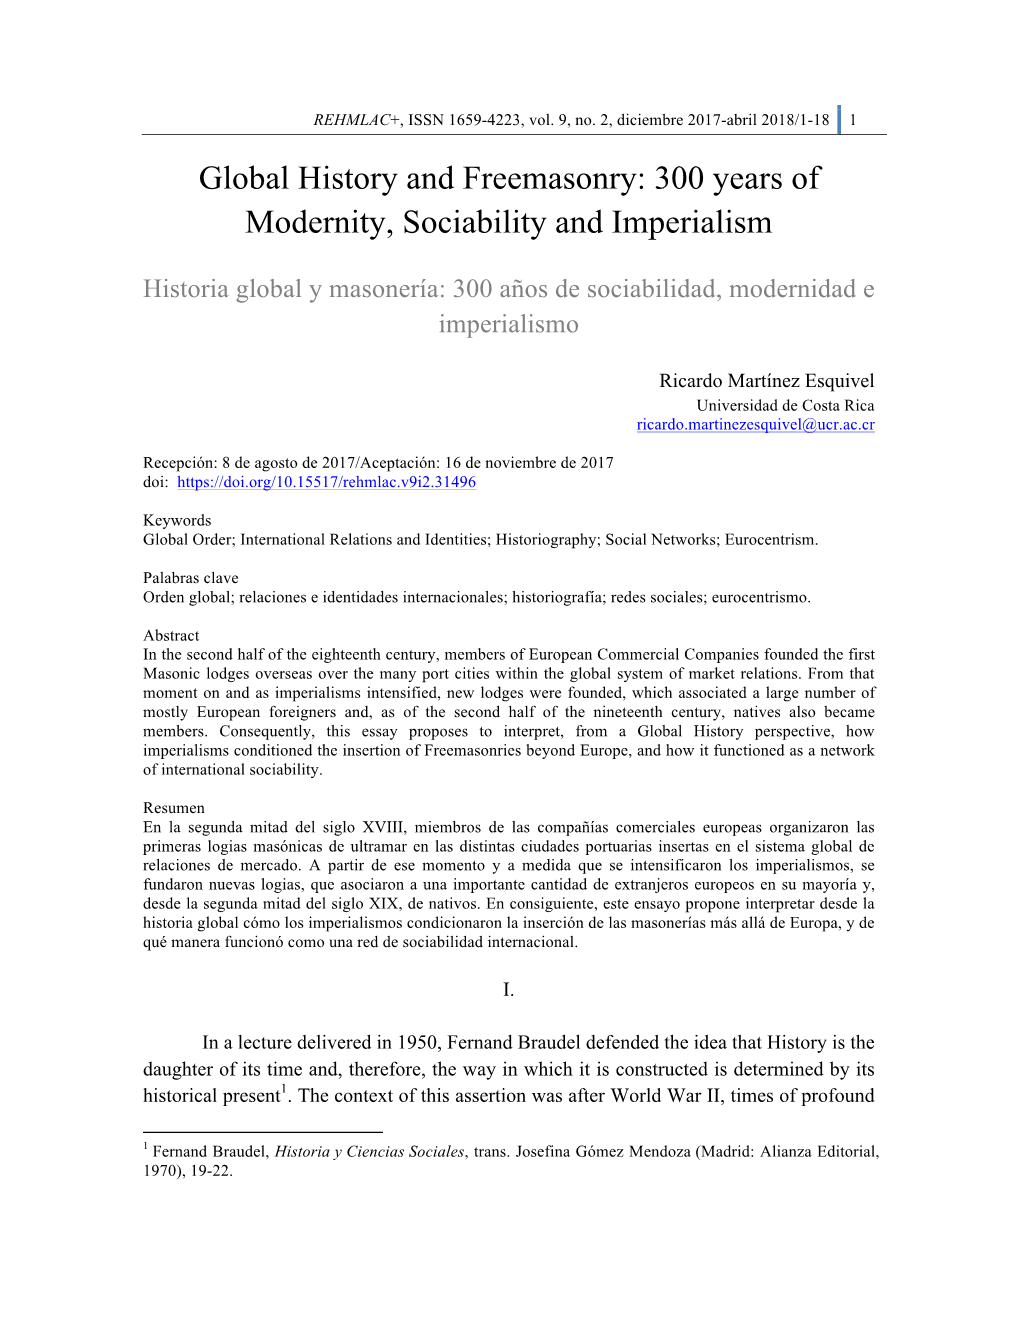 Global History and Freemasonry: 300 Years of Modernity, Sociability and Imperialism